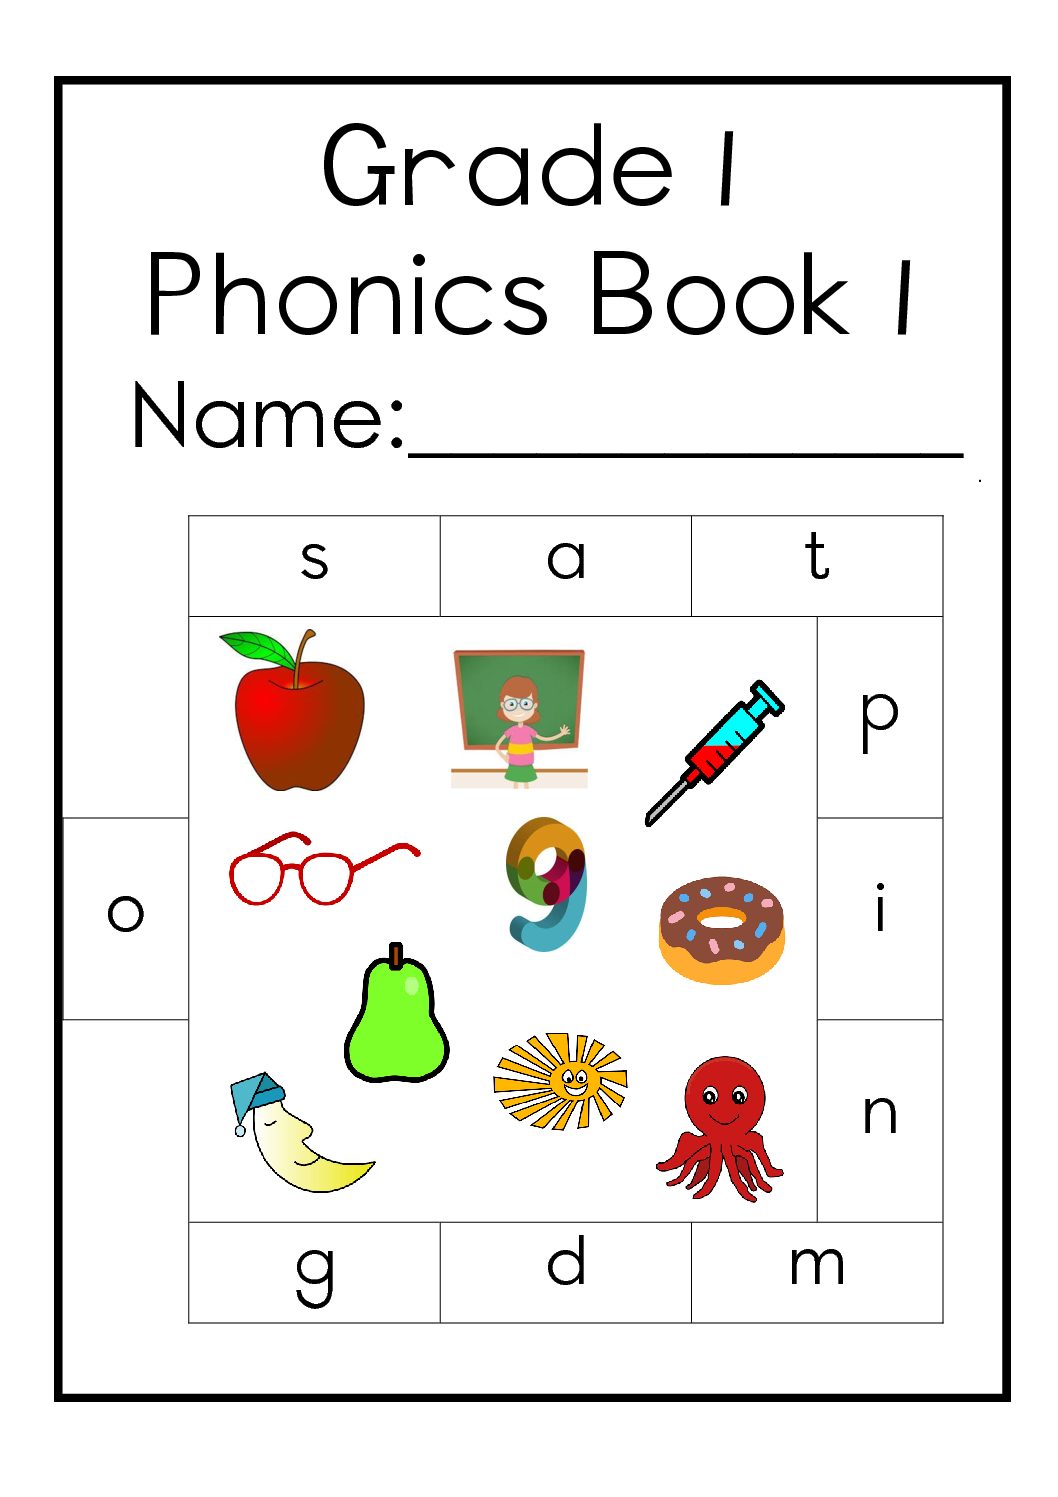 Phonics Examples For Grade 1